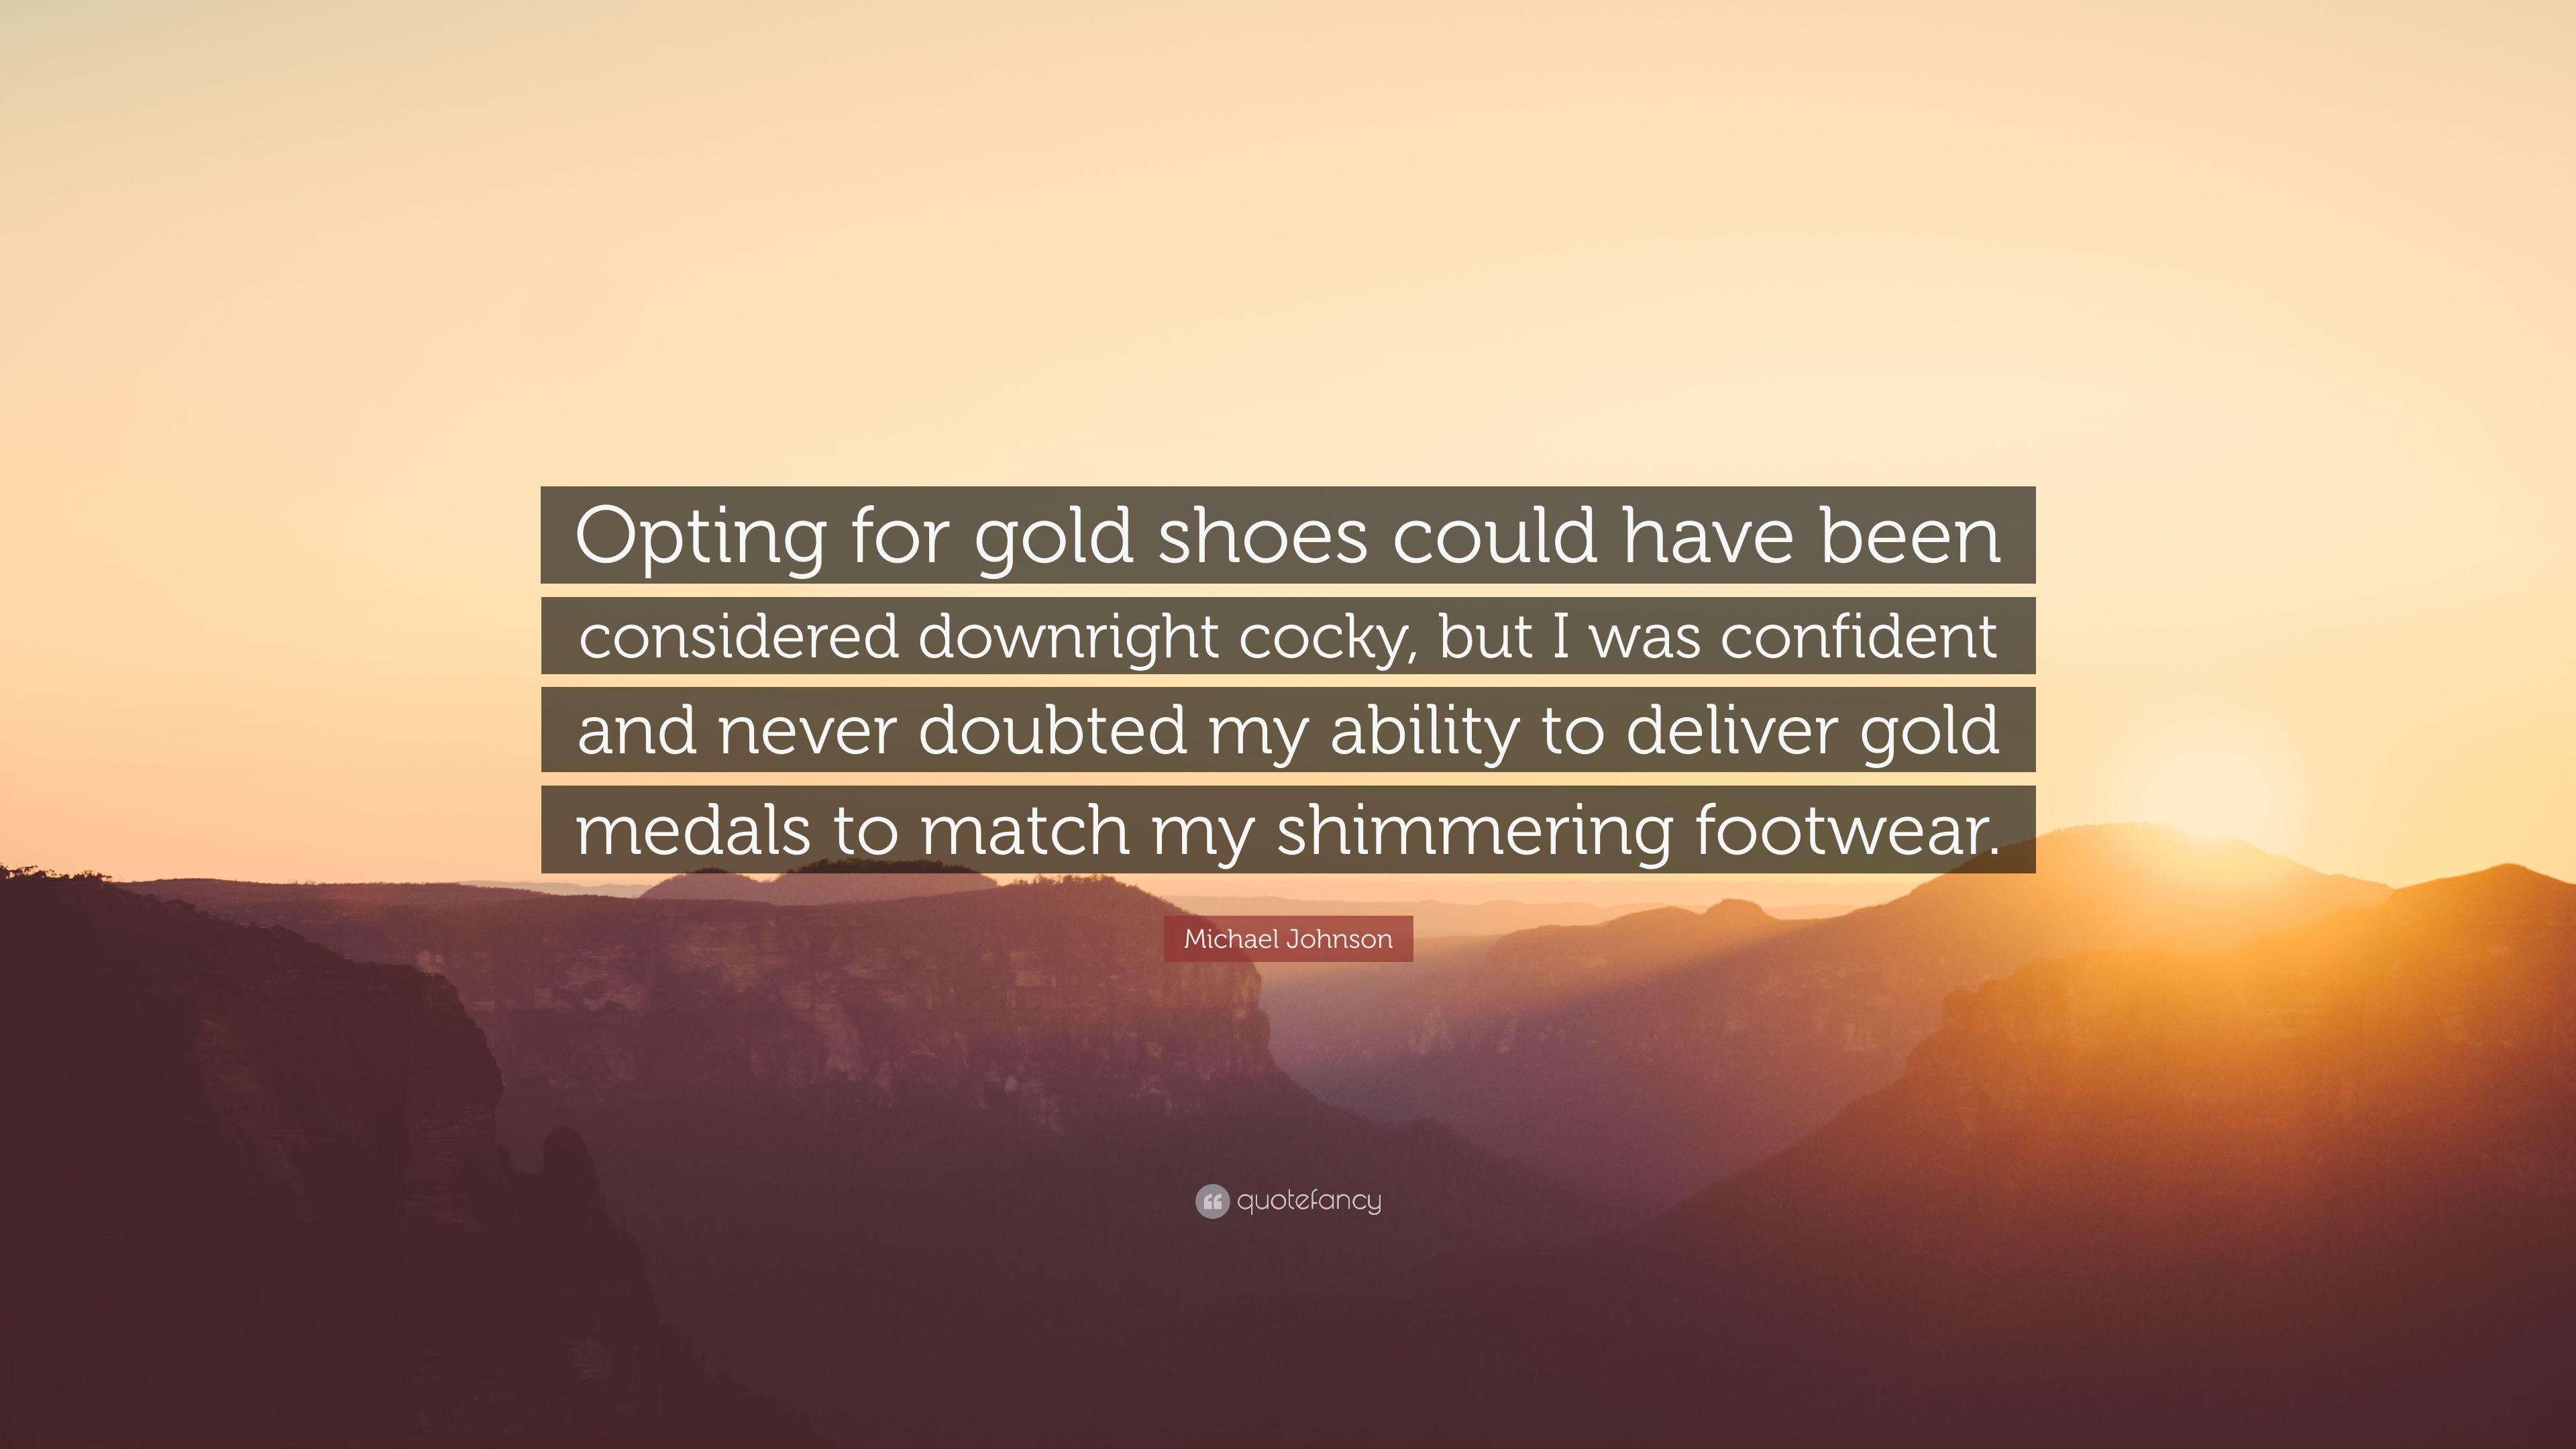 Michael Johnson Quote: “Opting for gold shoes could have been